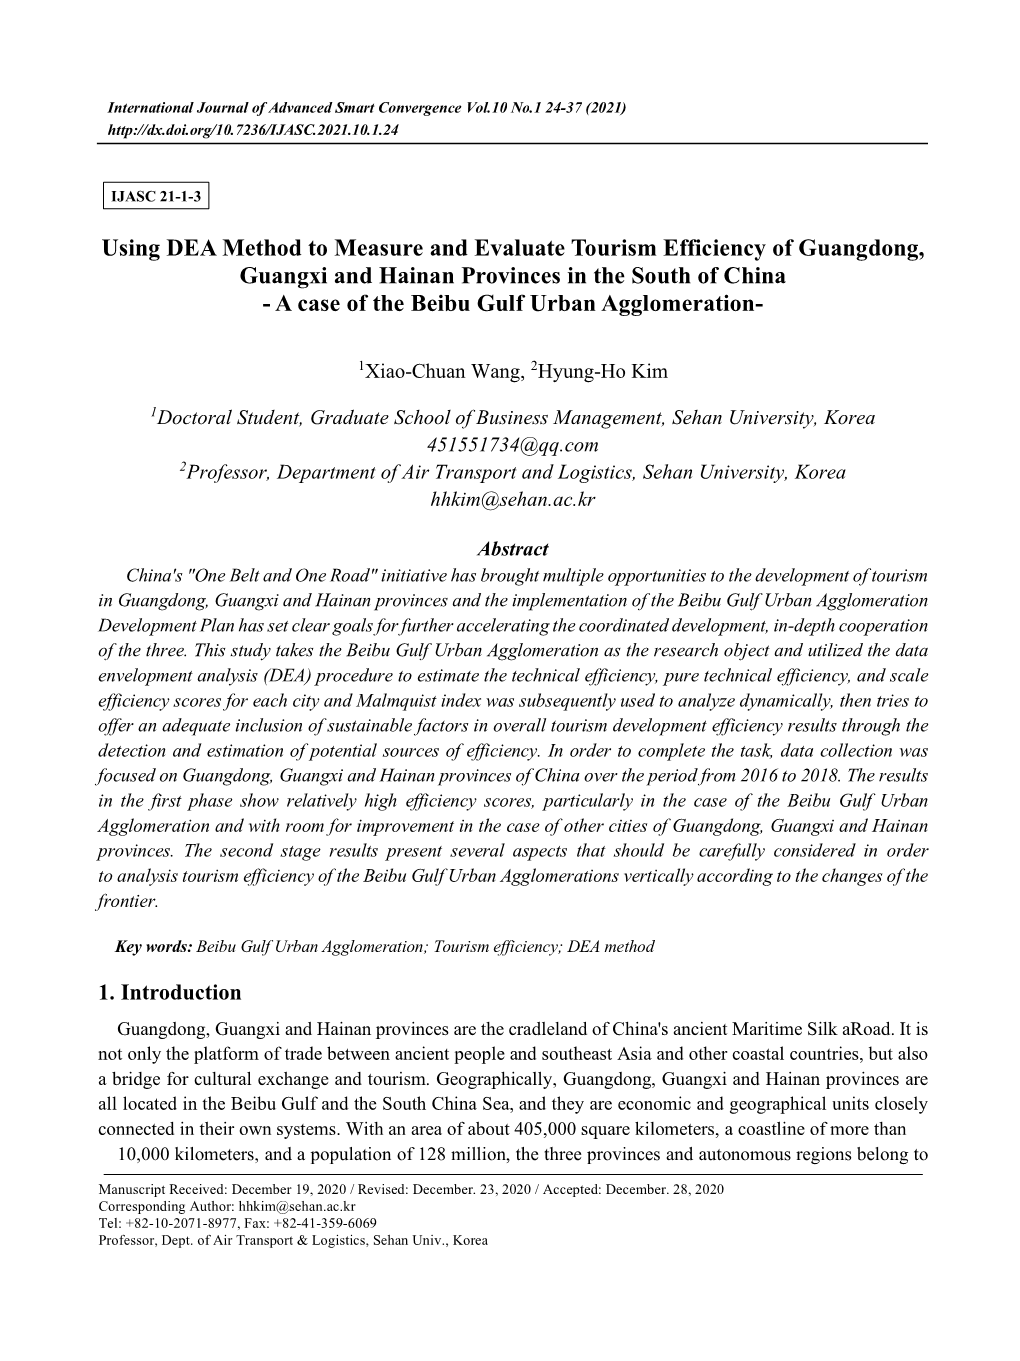 Using DEA Method to Measure and Evaluate Tourism Efficiency of Guangdong, Guangxi and Hainan Provinces in the South of China